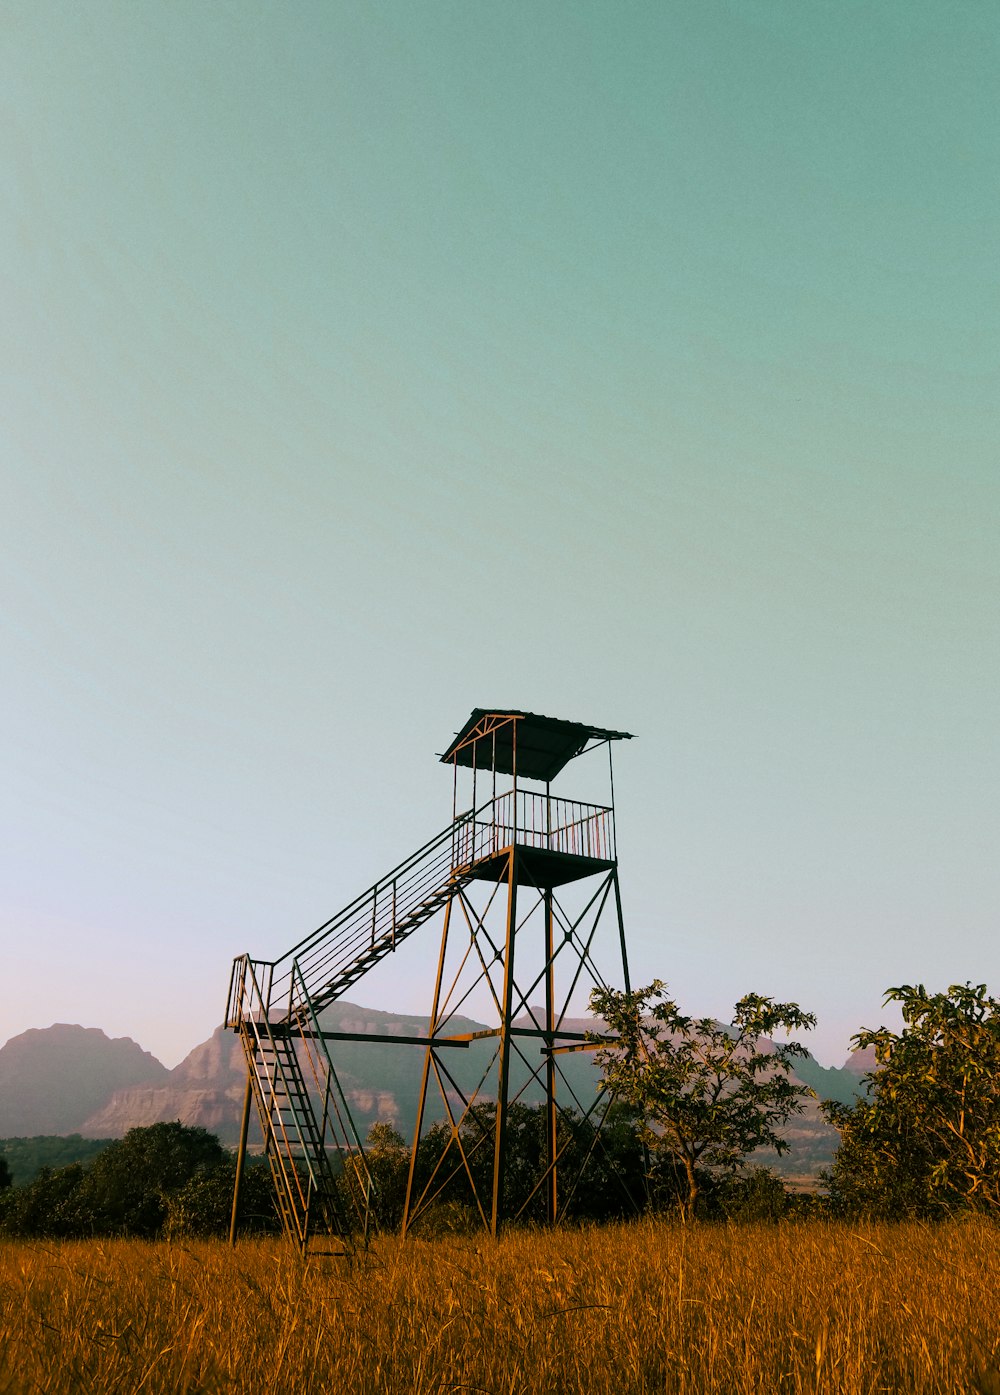 a lifeguard tower in a field with mountains in the background